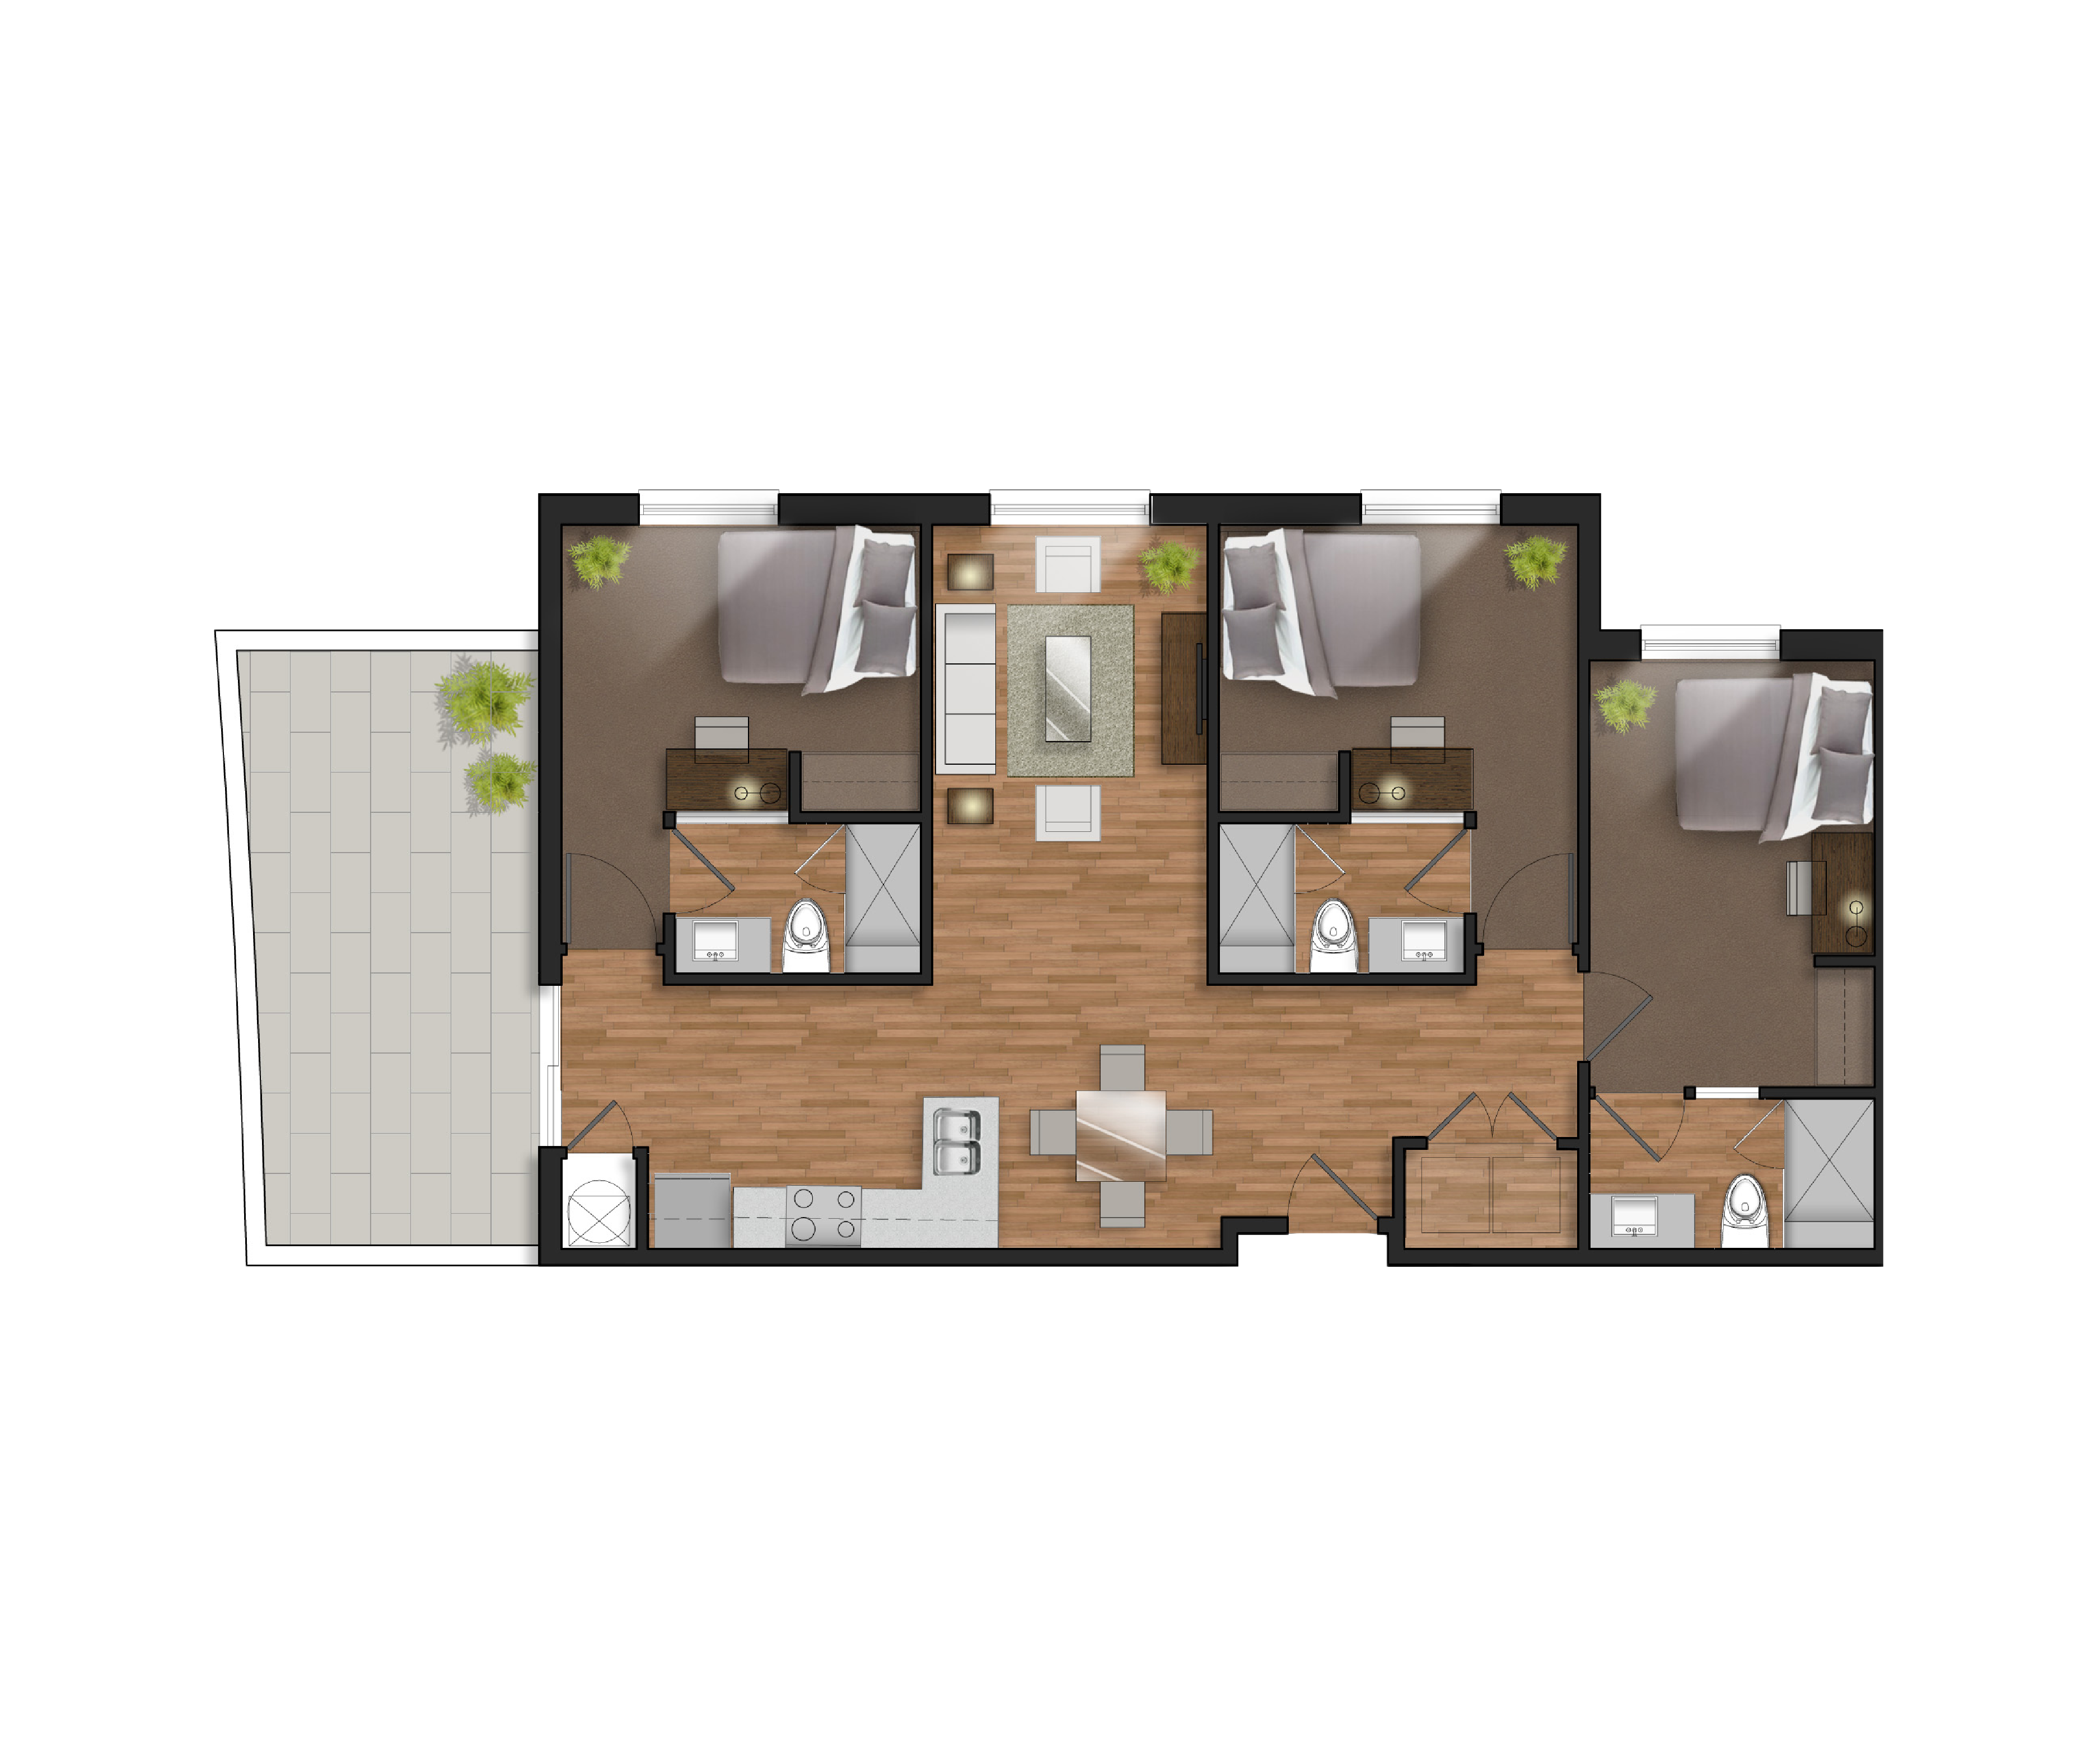 3 bedroom student apartment layout